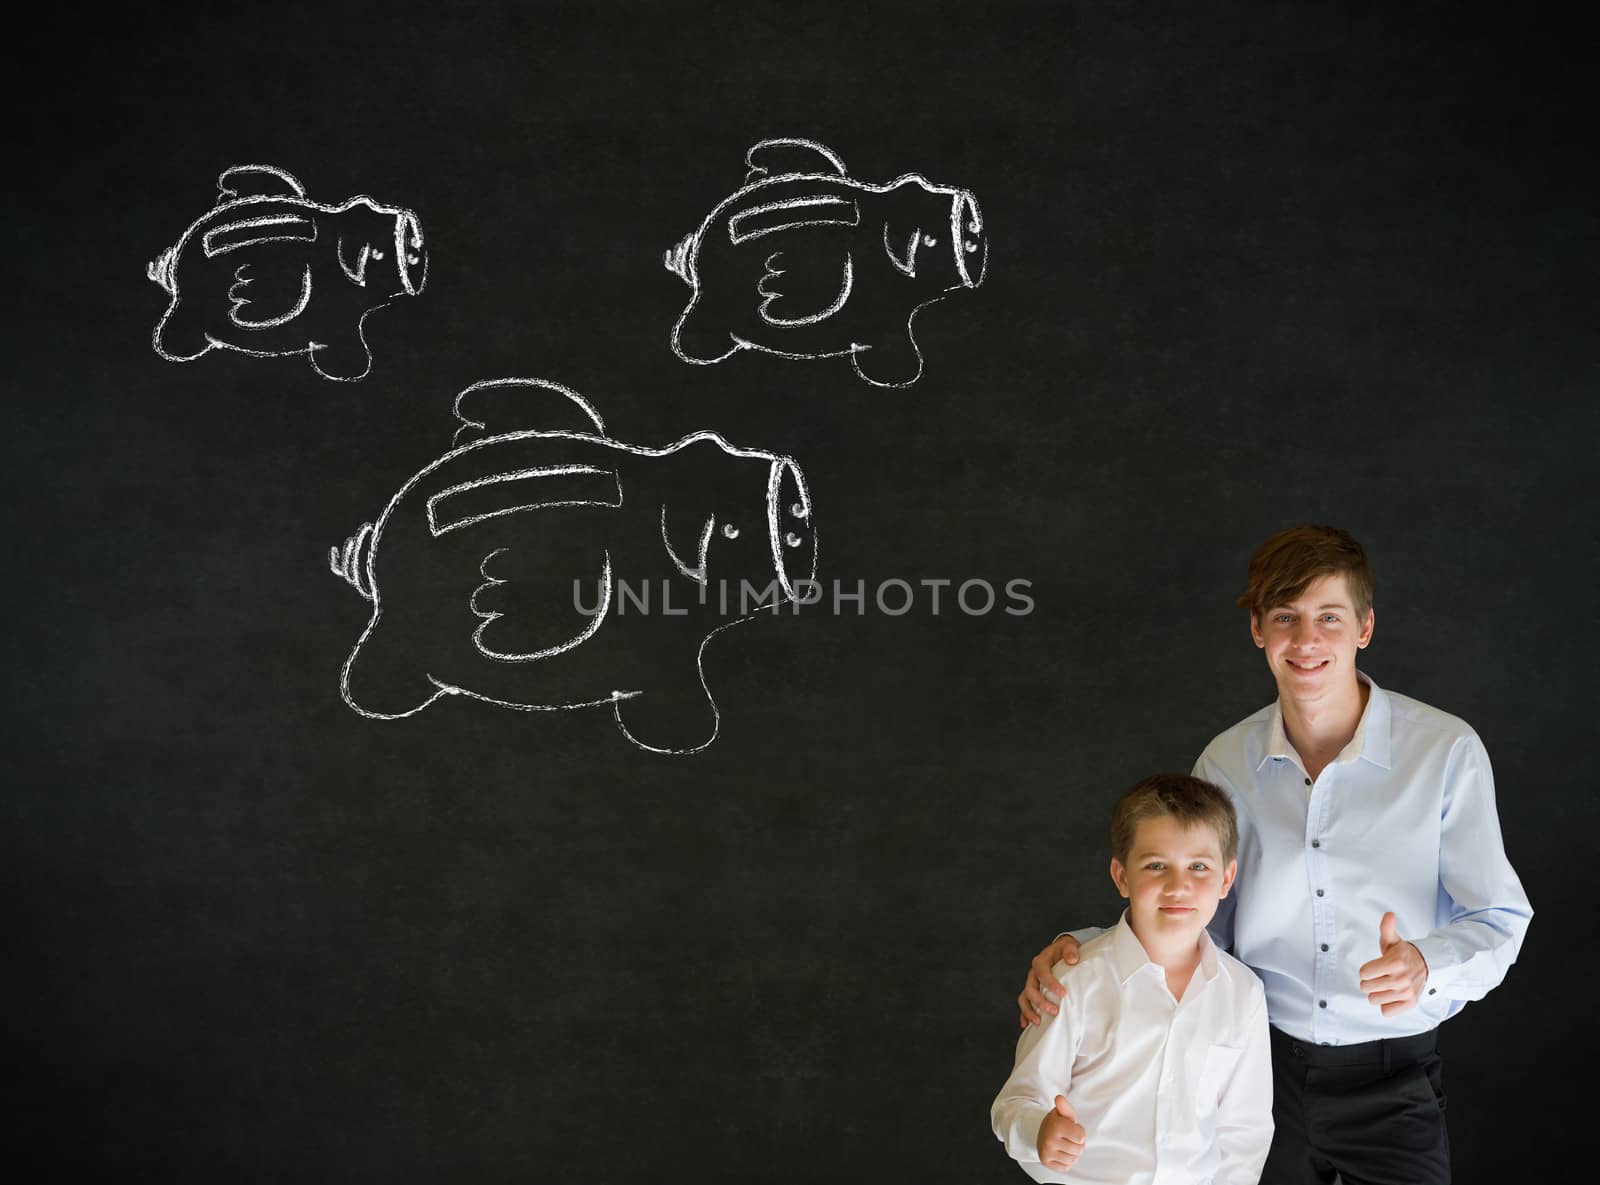 Young business boy with flying money piggy banks in chalk on blackboard background by alistaircotton